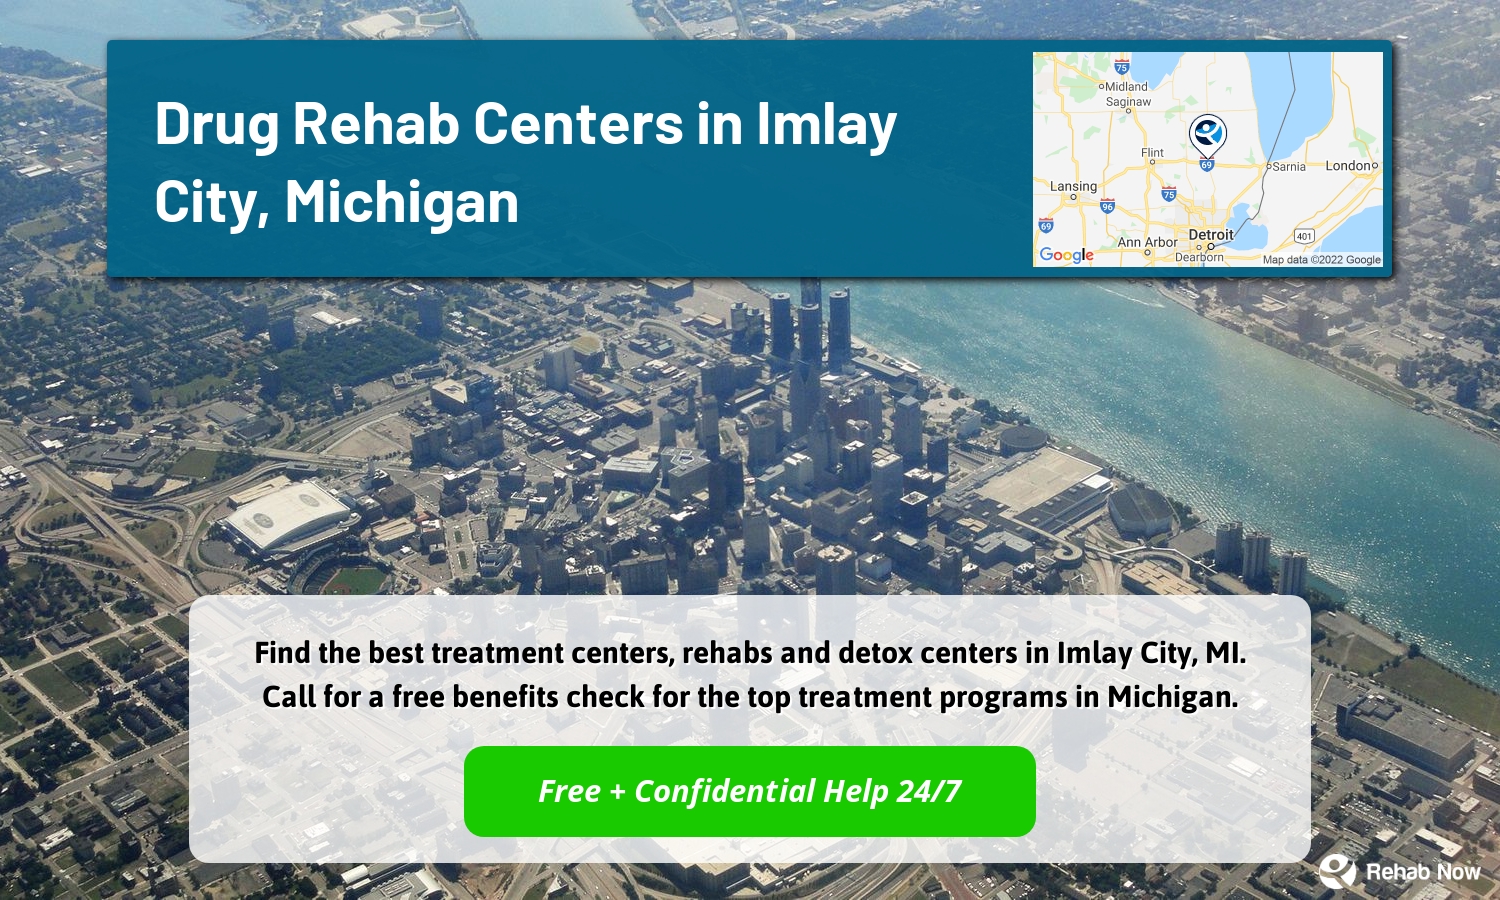 Find the best treatment centers, rehabs and detox centers in Imlay City, MI. Call for a free benefits check for the top treatment programs in Michigan.